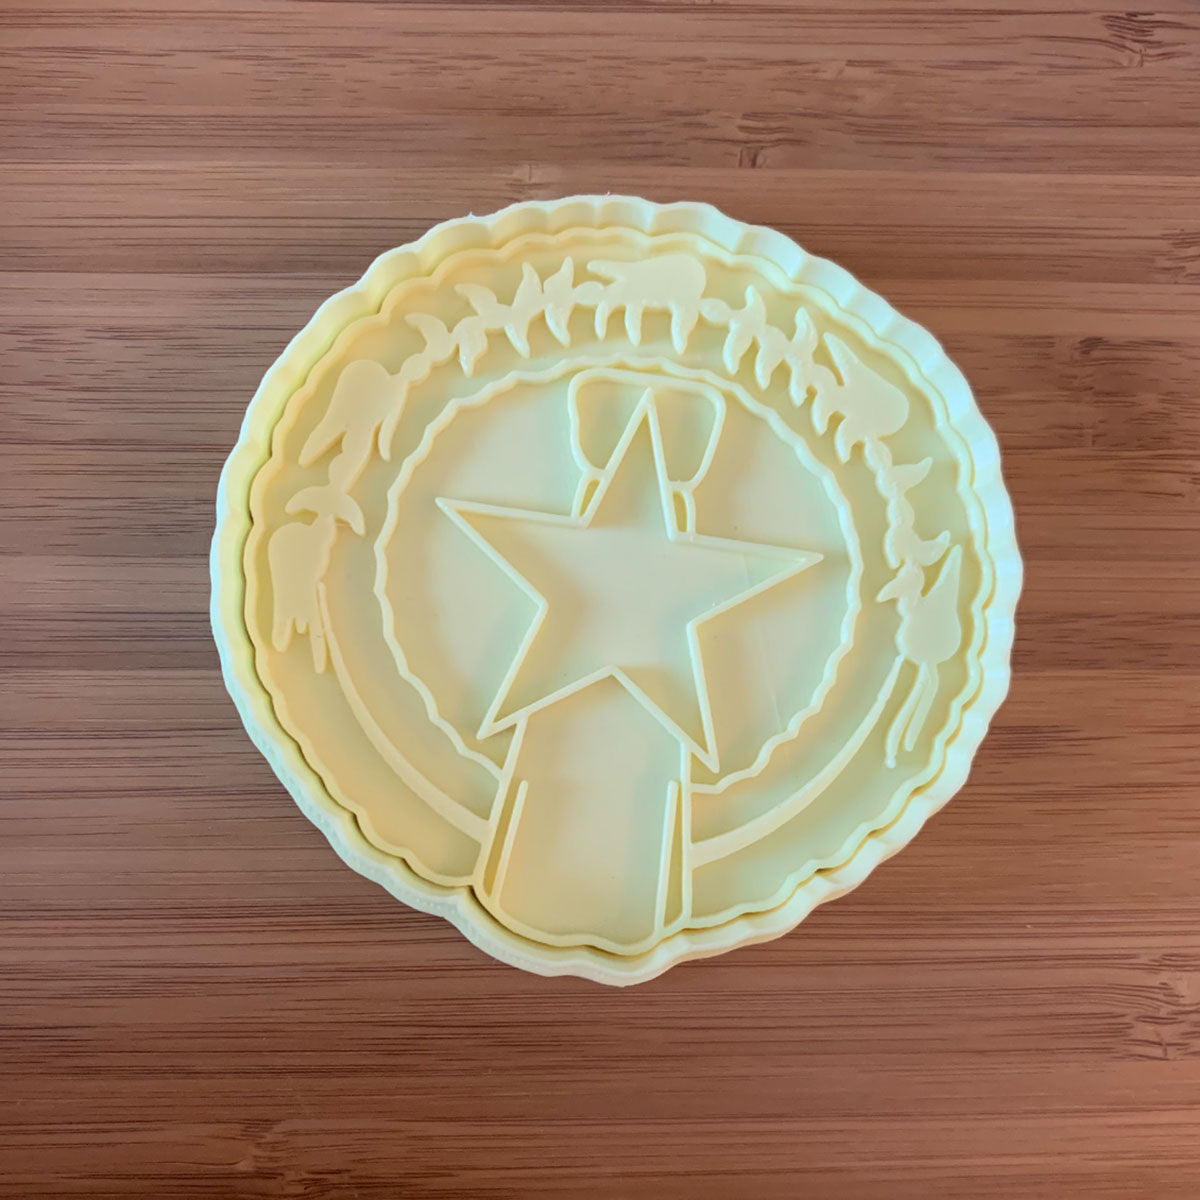 CNMI Seal Cookie Cutter and Stamp - Ready to Ship